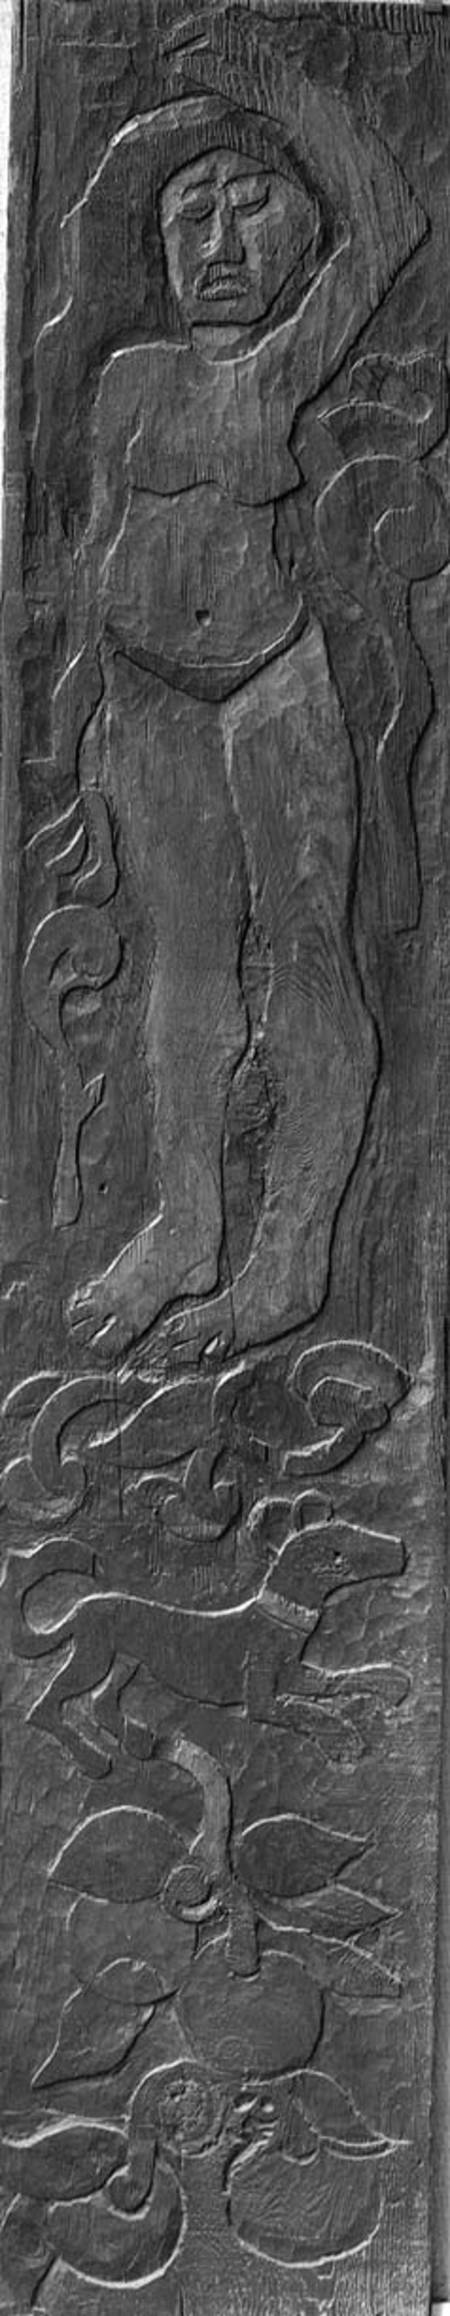 Carved vertical panel from the door frame of Gauguin's final residence in Atuona on Hiva Oa (Marques de Paul Gauguin